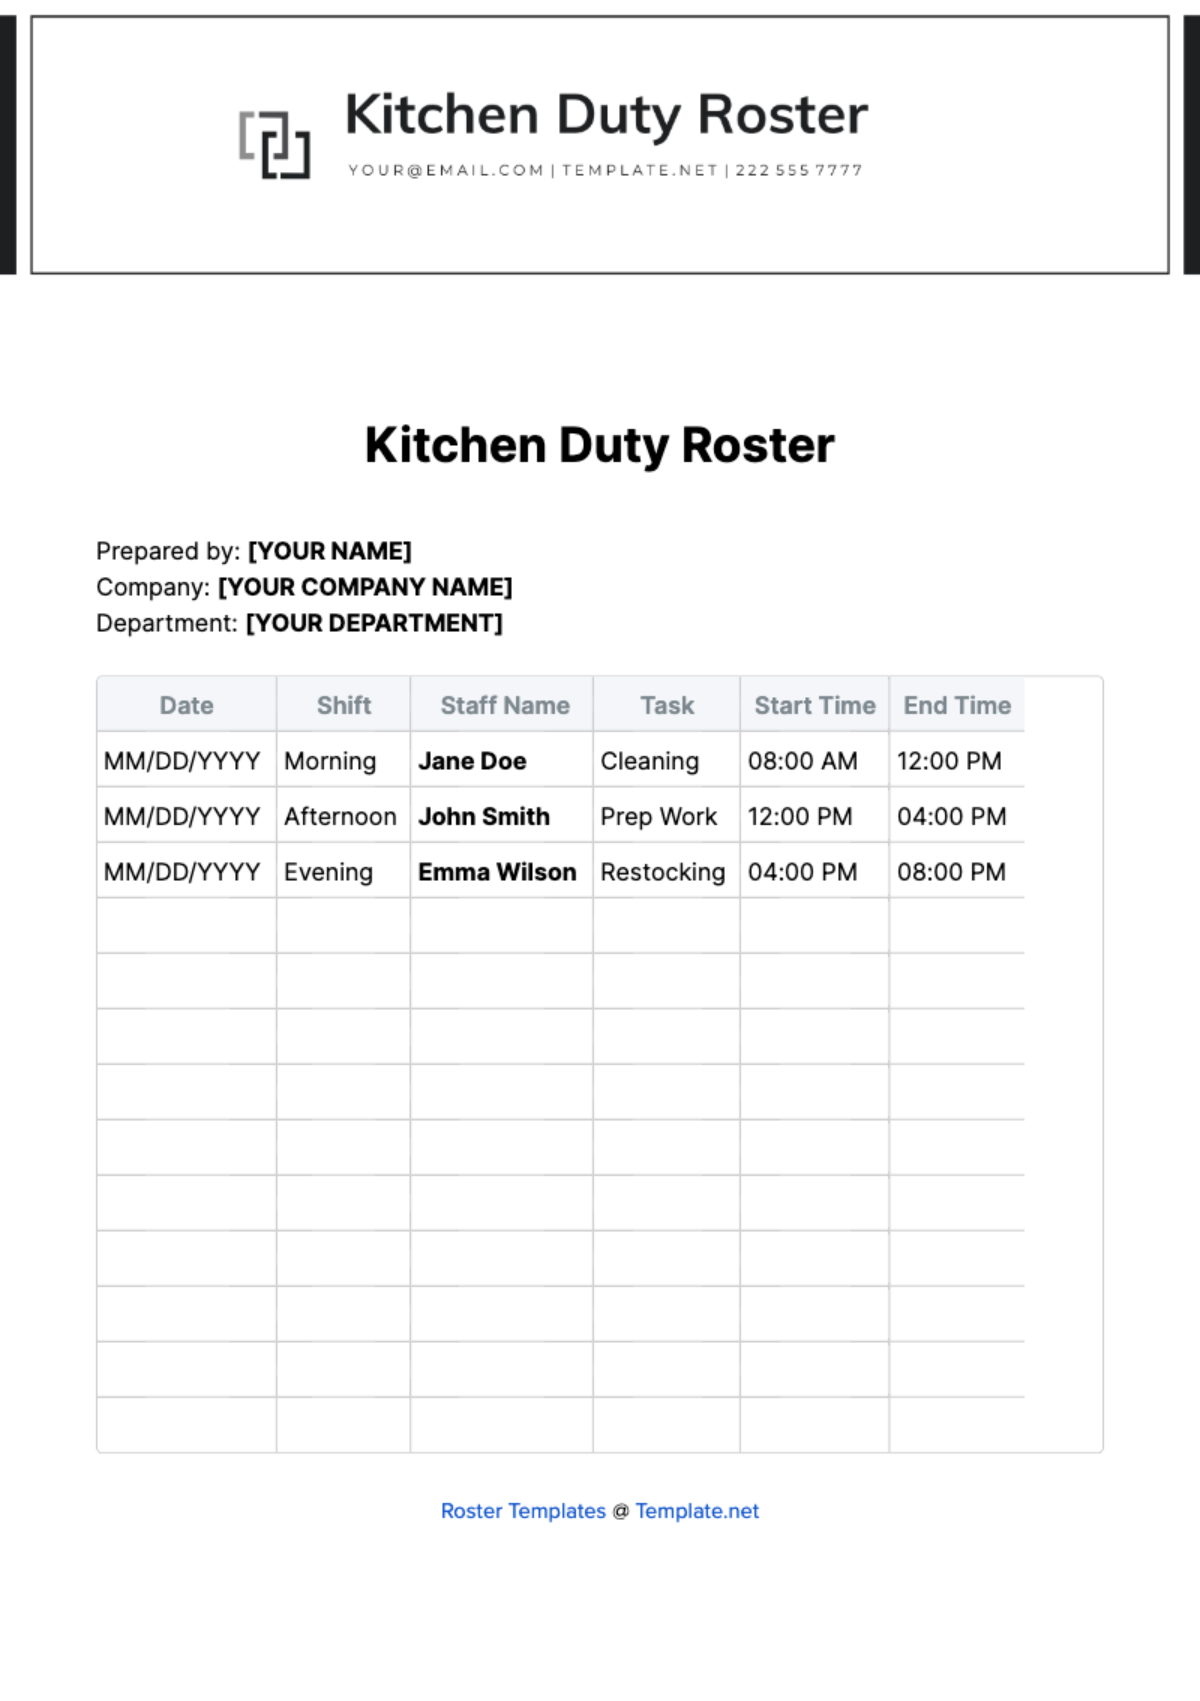 Kitchen Duty Roster Template